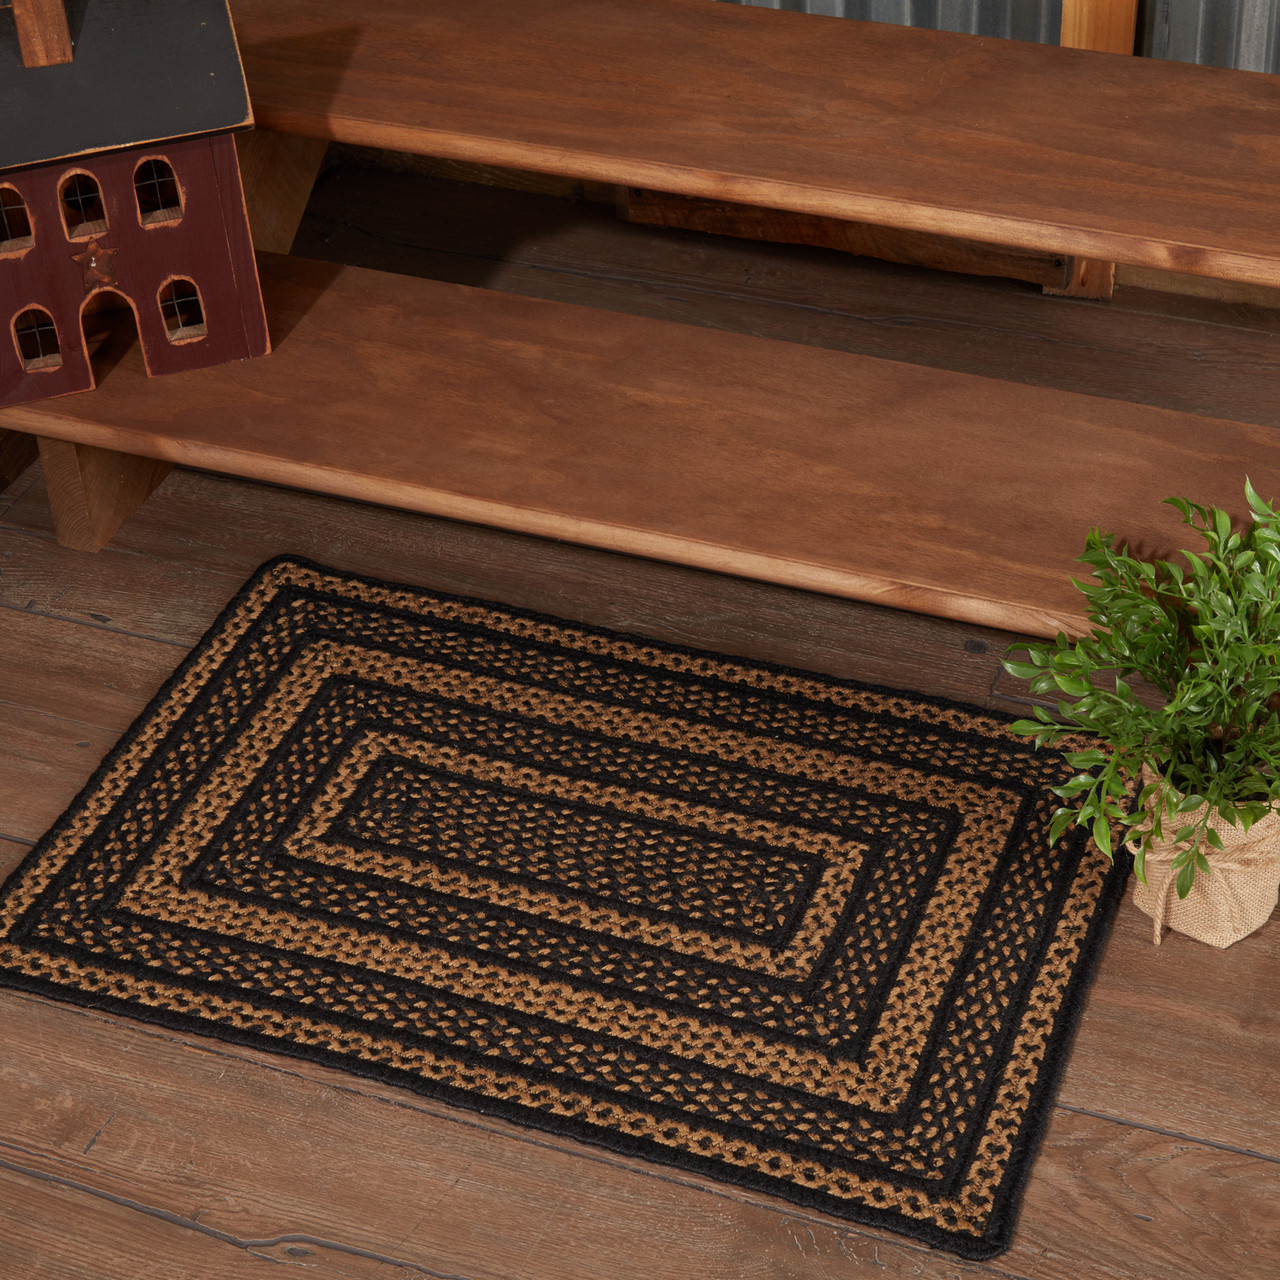 Buy Country and Farmhouse Style Braided Jute Area Rugs